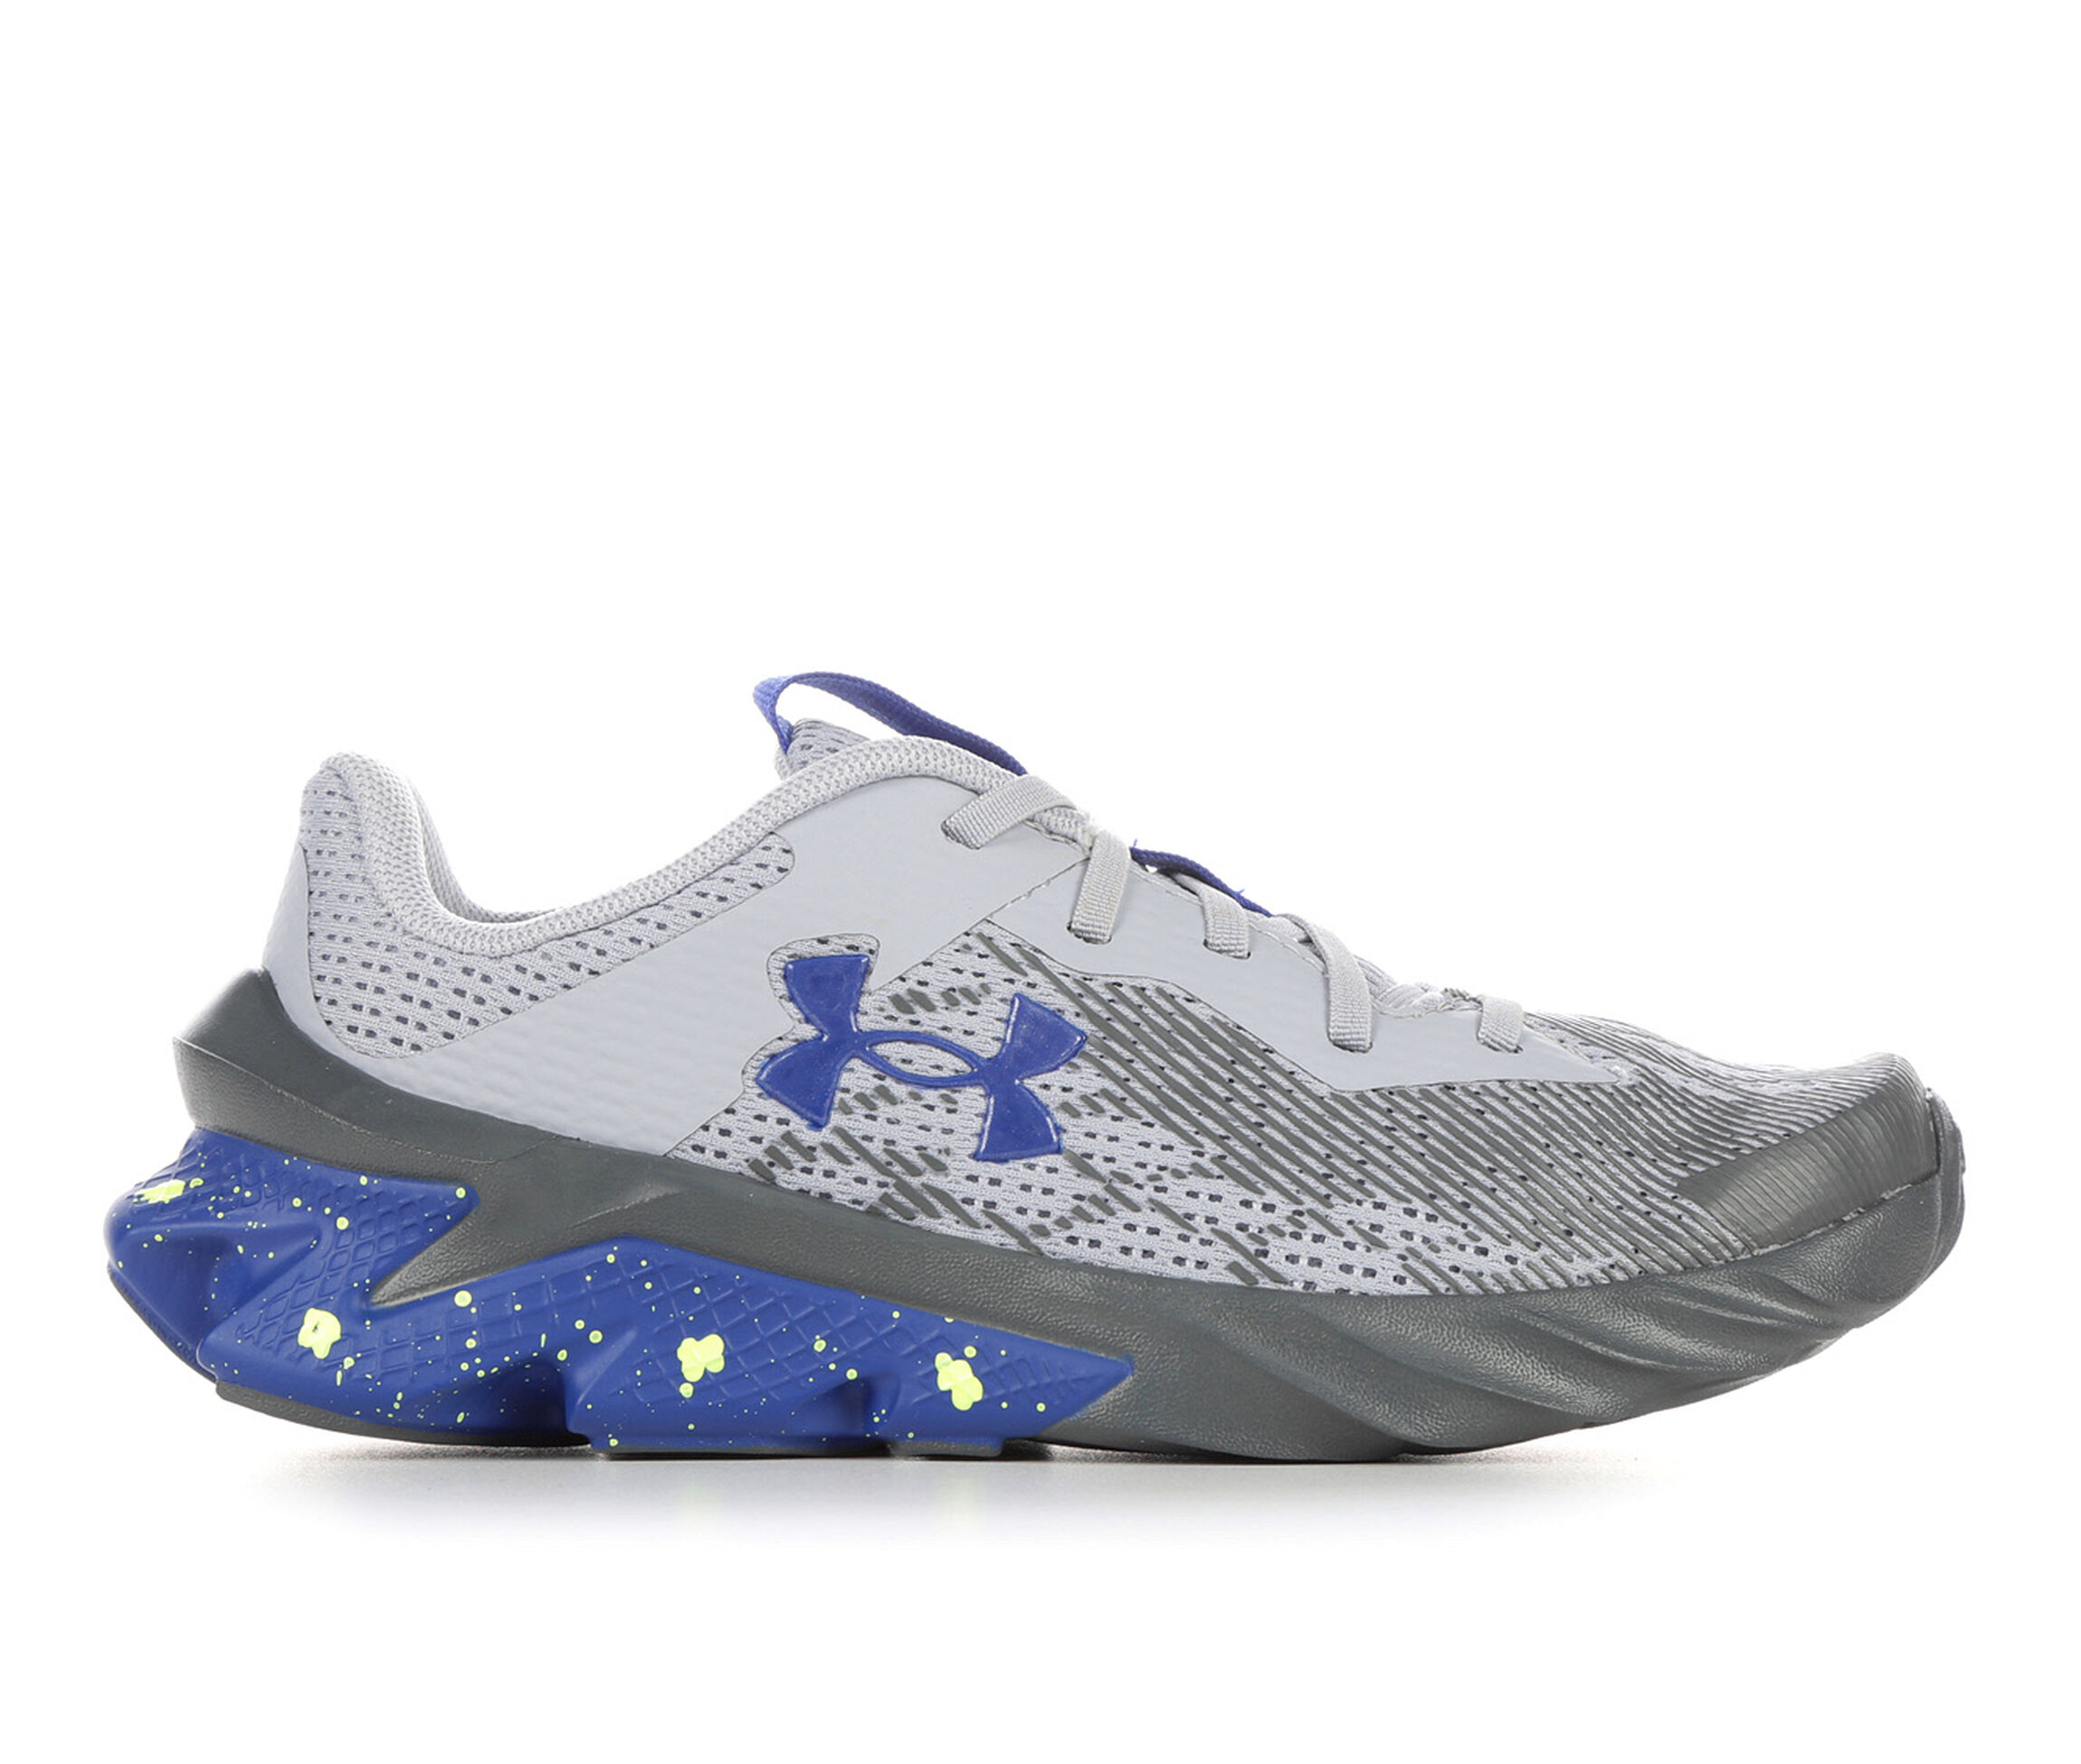 Under Armour Shoes & Accessories | Shoe Carnival